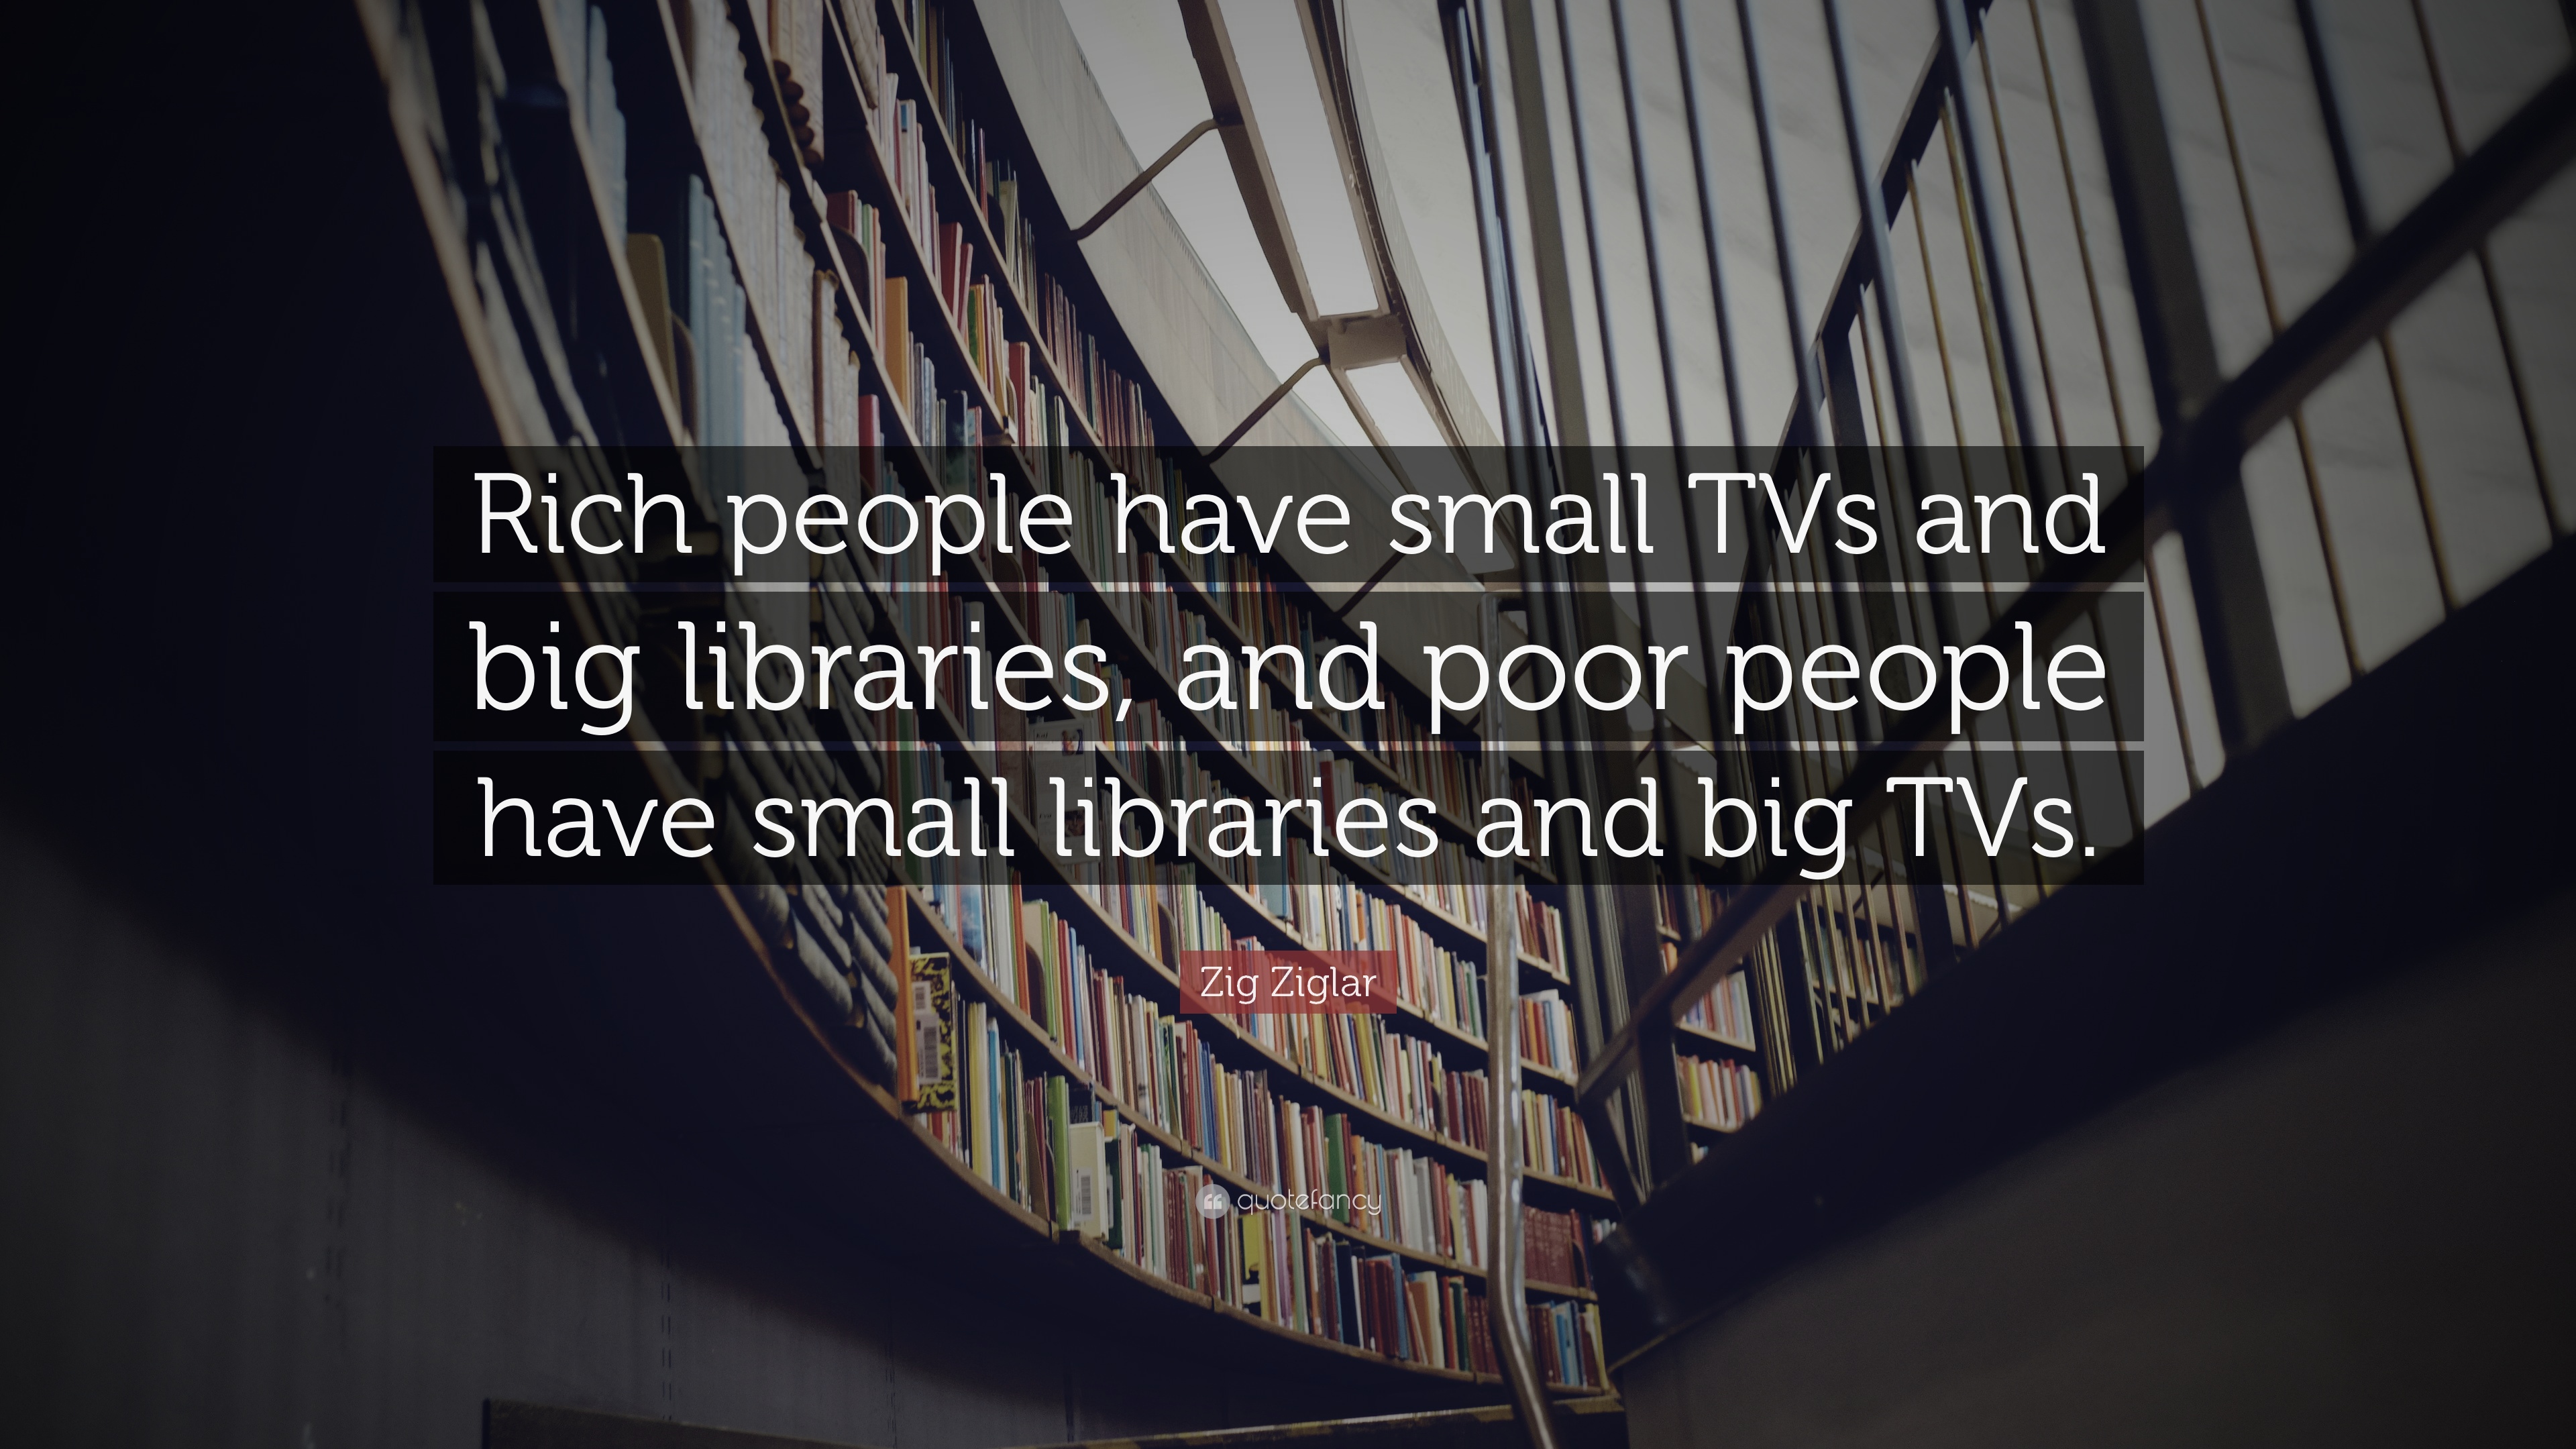 Zig Ziglar Quote: “Rich people have small TVs and big libraries